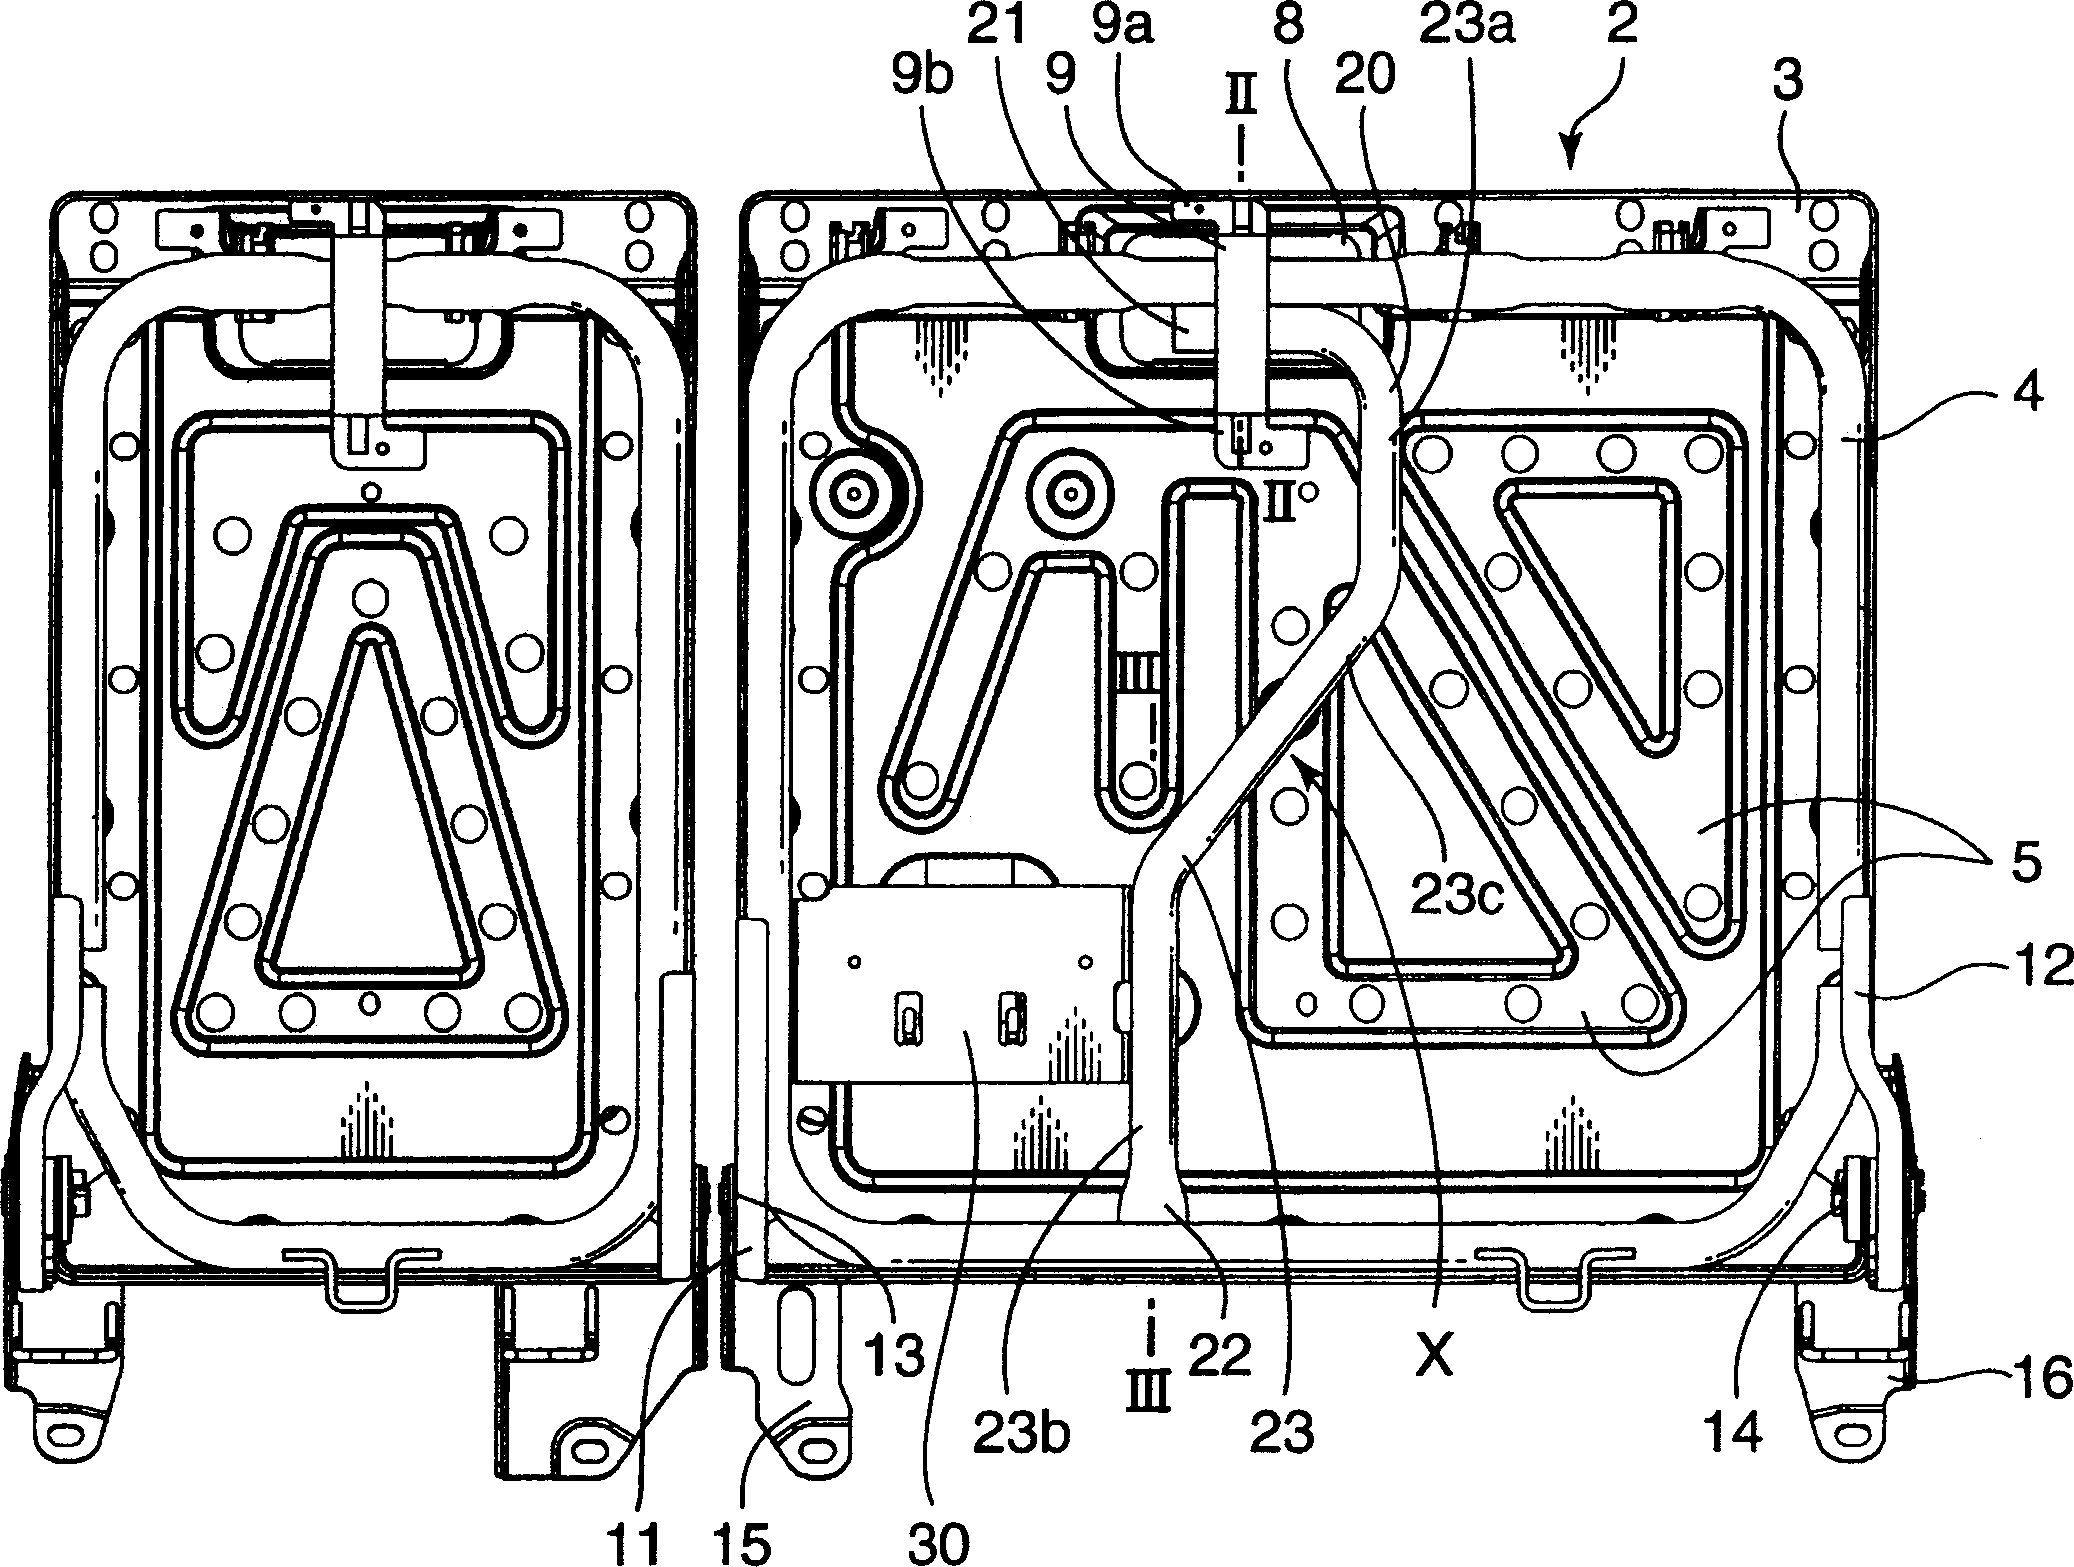 Seat backrest frame structure of vehicle and seat backrest